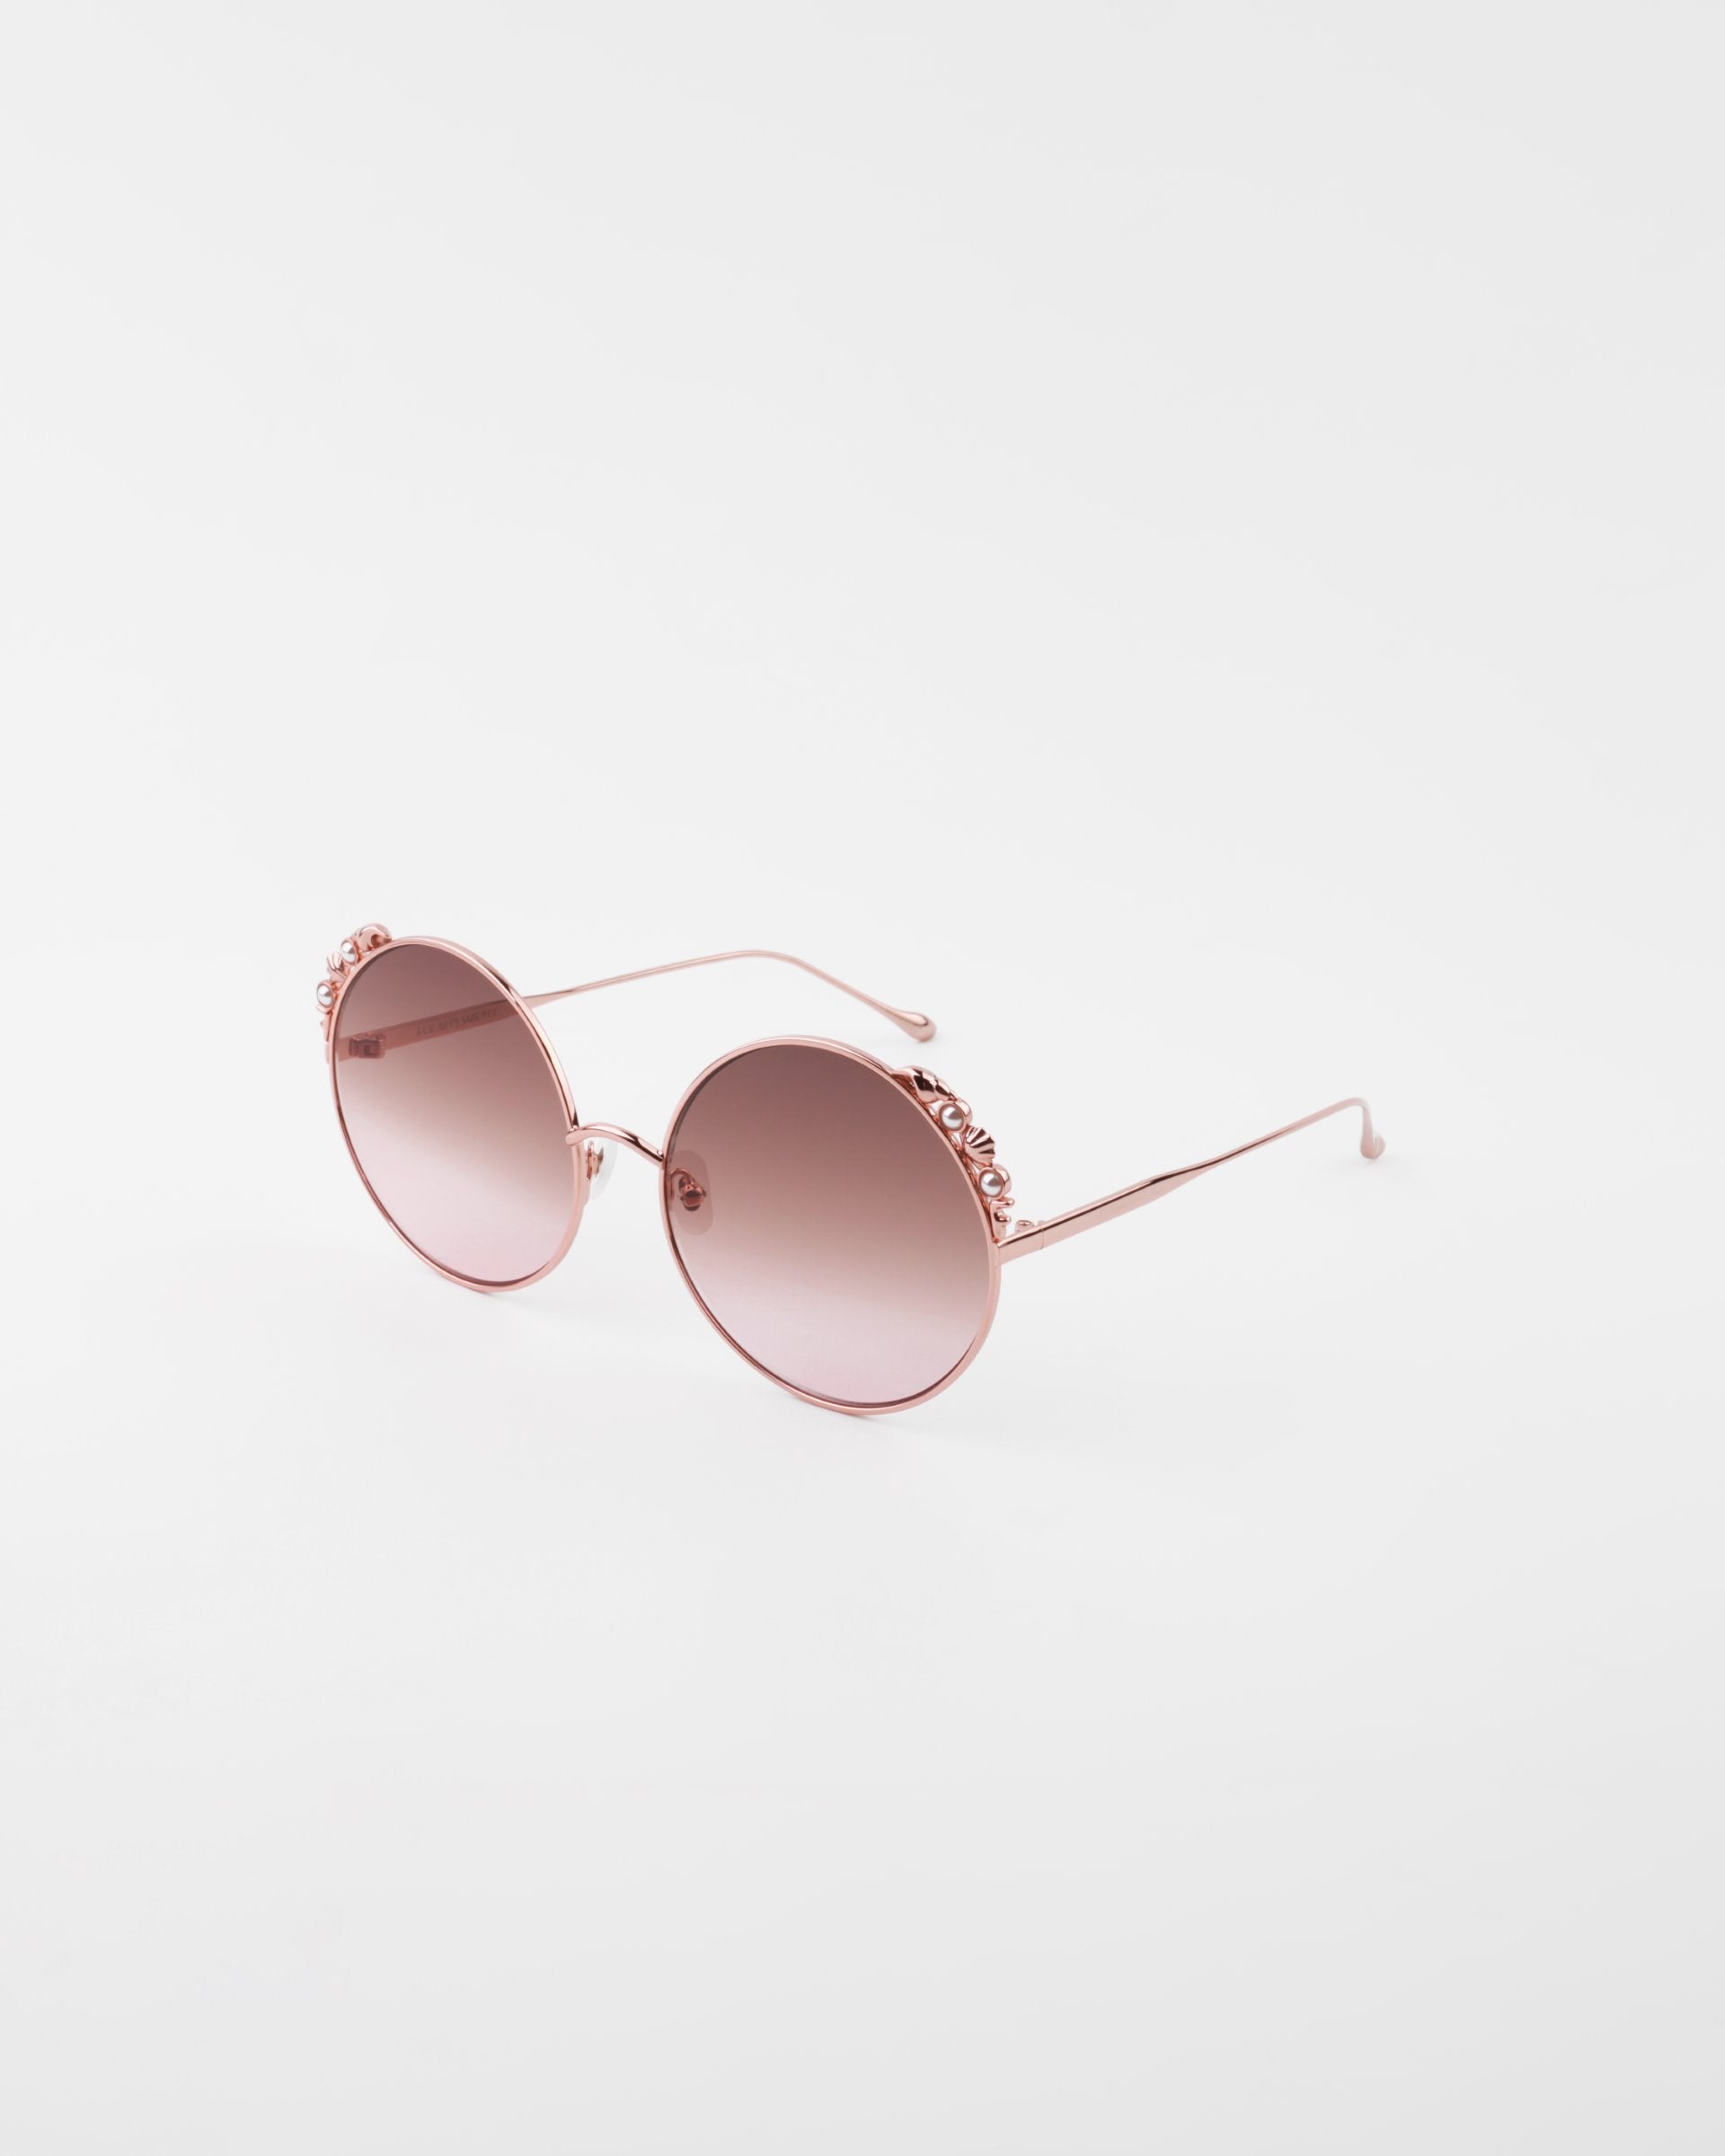 A pair of stylish round sunglasses with ultra-lightweight shatter-resistant pink-tinted lenses and rose gold frames featuring floral detailing on the upper rims, offering 100% UVA &amp; UVB protection, the Lindy by For Art&#39;s Sake®.